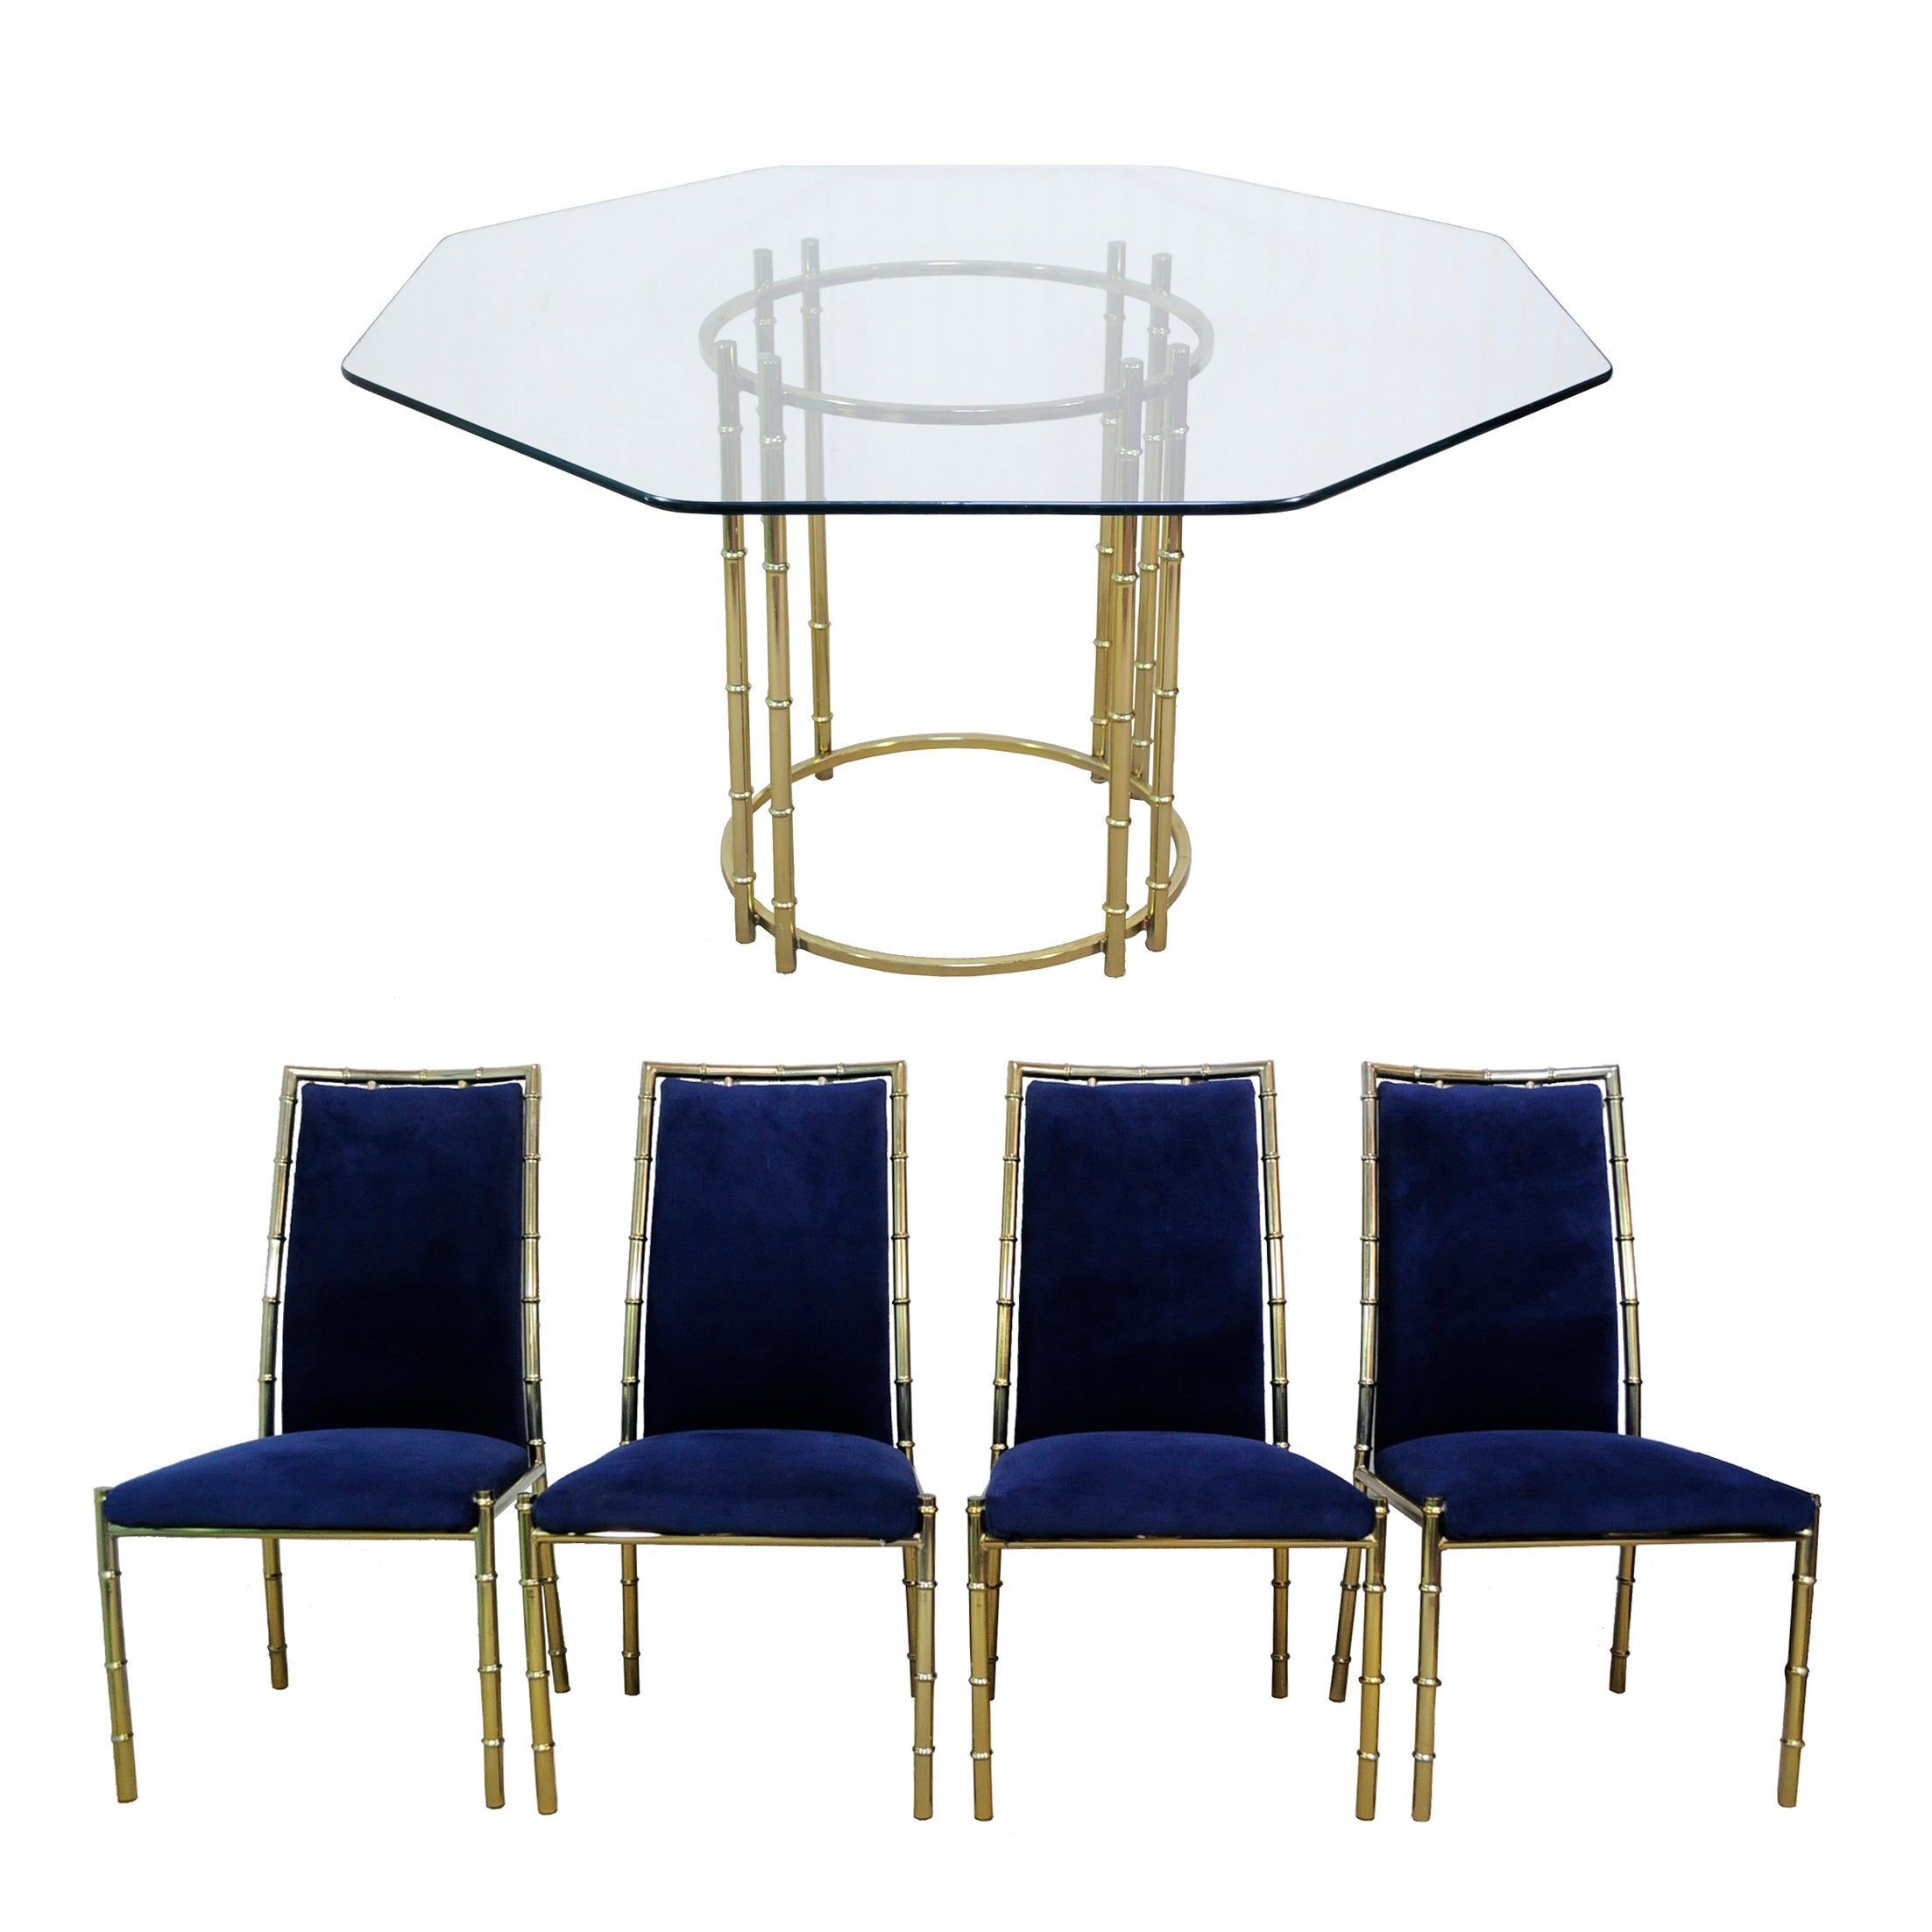 Hollywood Regency Faux Bamboo Dining Set Gold / Brass Finish - Chairs & Table